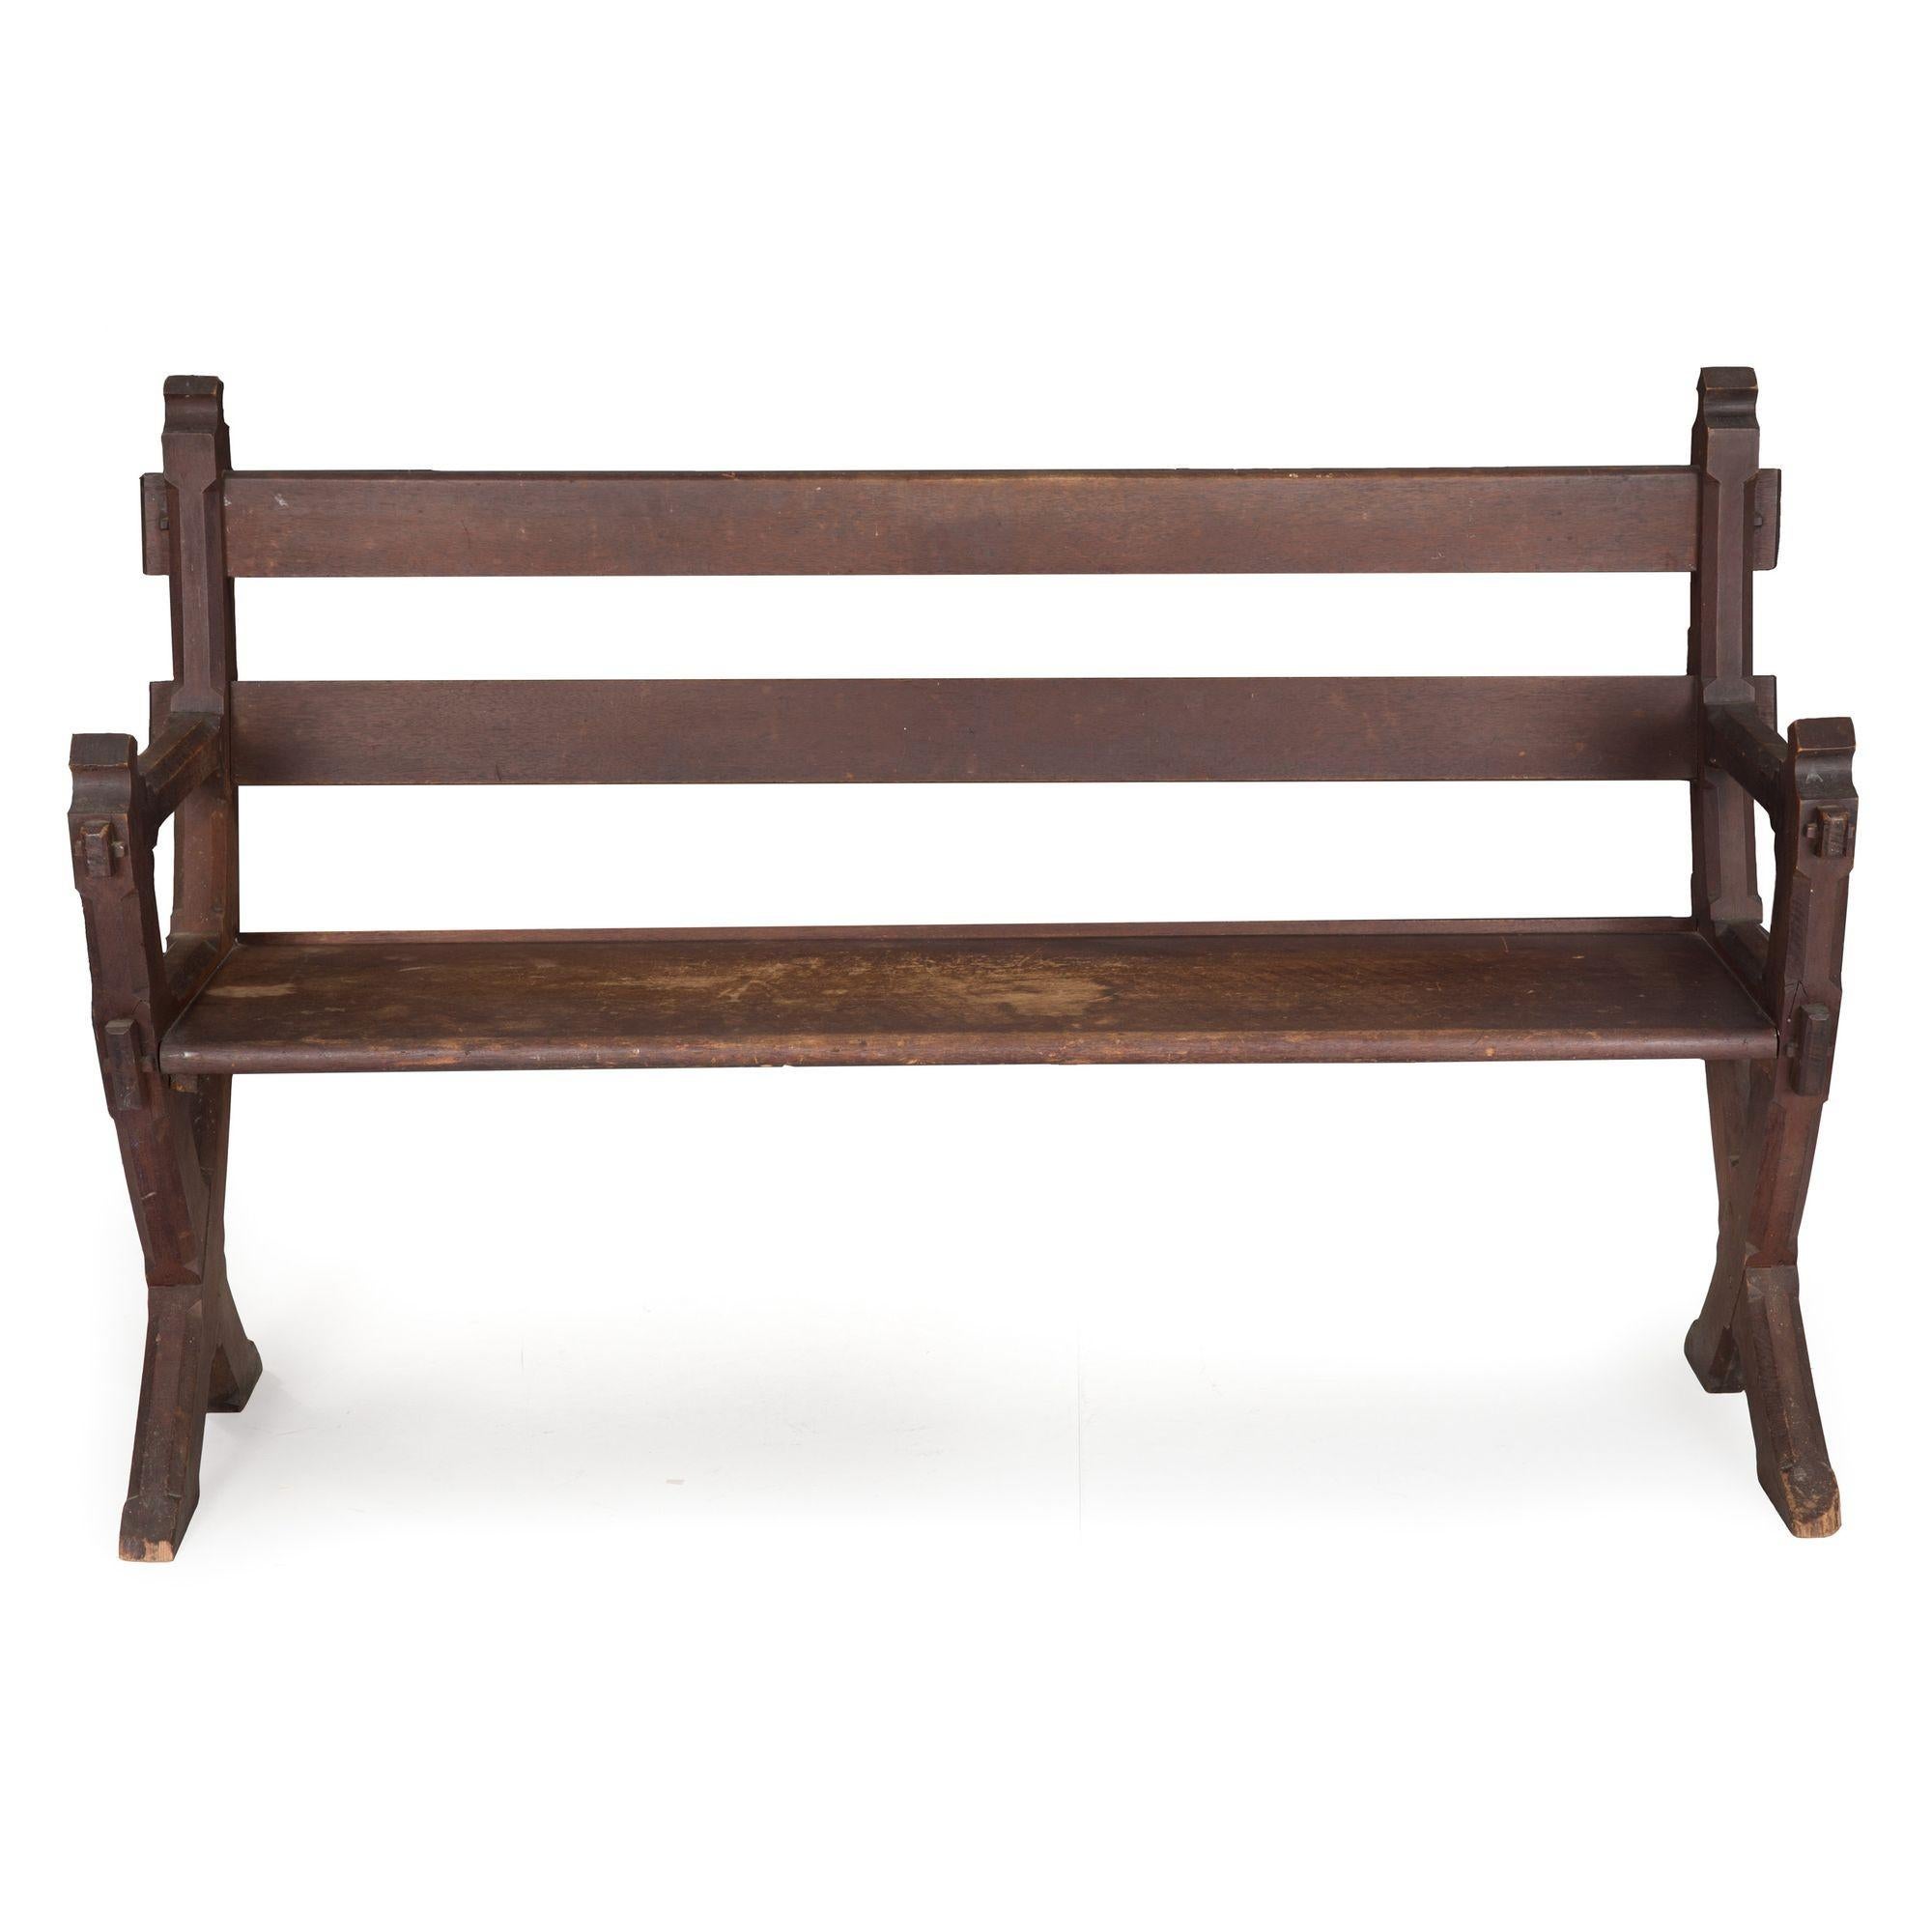 GOTHIC REVIVAL DOVETAILED WALNUT HALL BENCH
United States, circa 1890; with a wonderful early oxidized surface
Item # 209HOE29P 

A very interesting settee from the last decade of the nineteenth century, this wonderful example is executed in solid